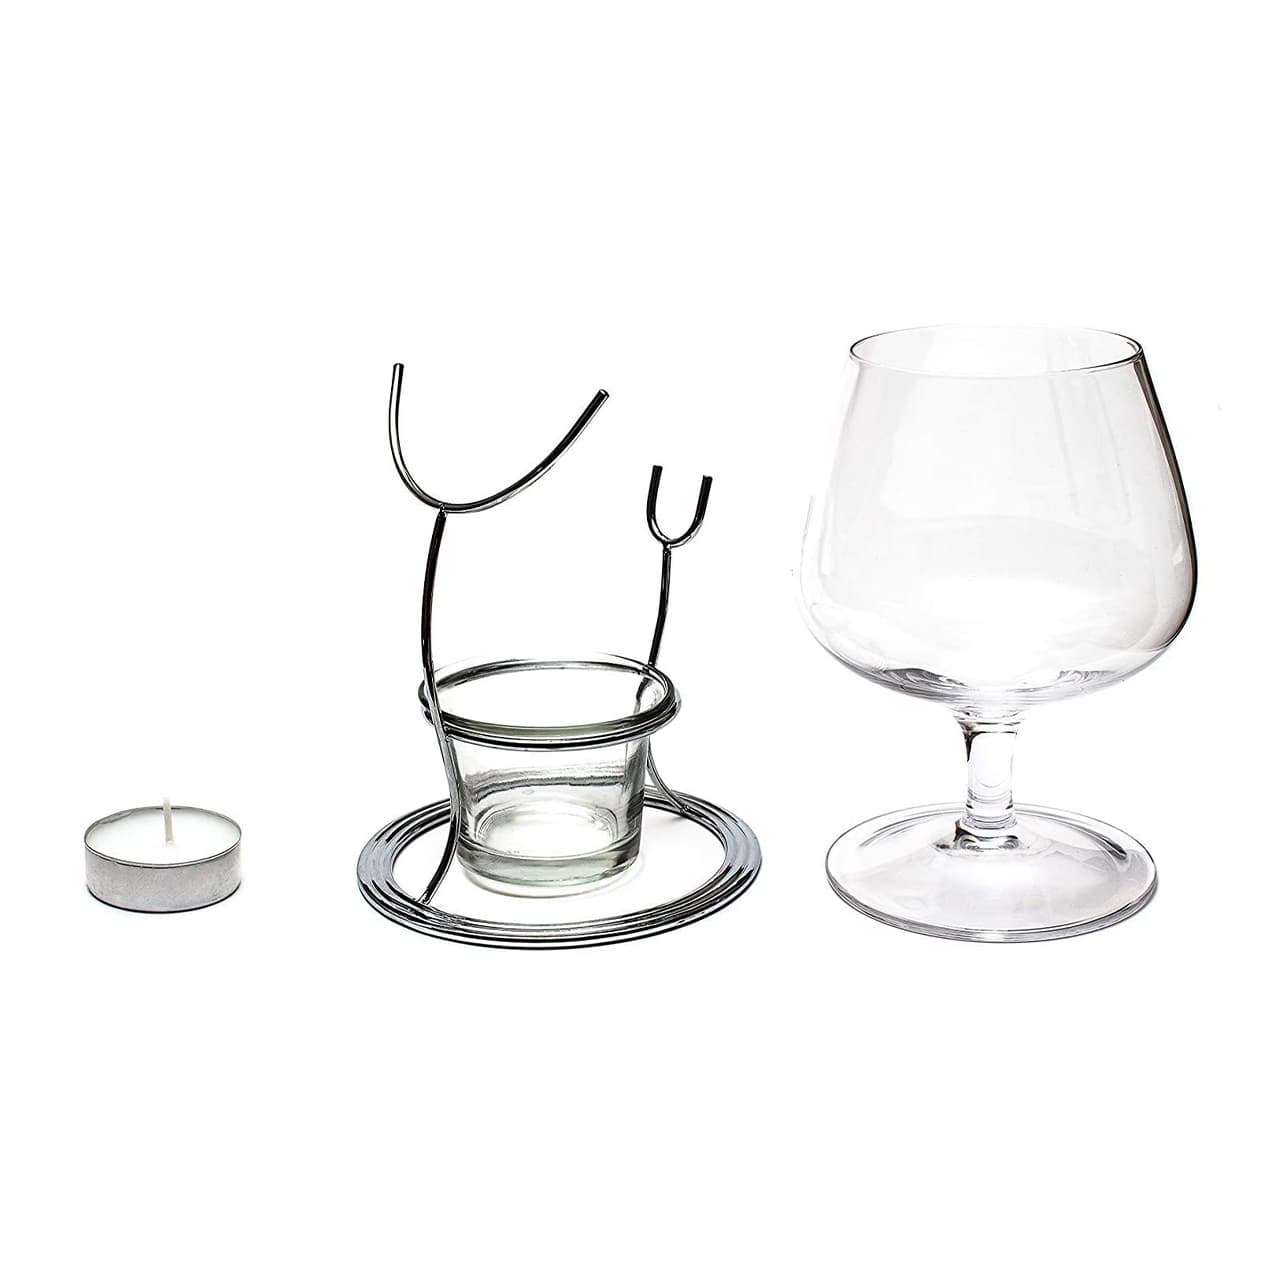 Brandy Snifter Warmer Glass and Stand